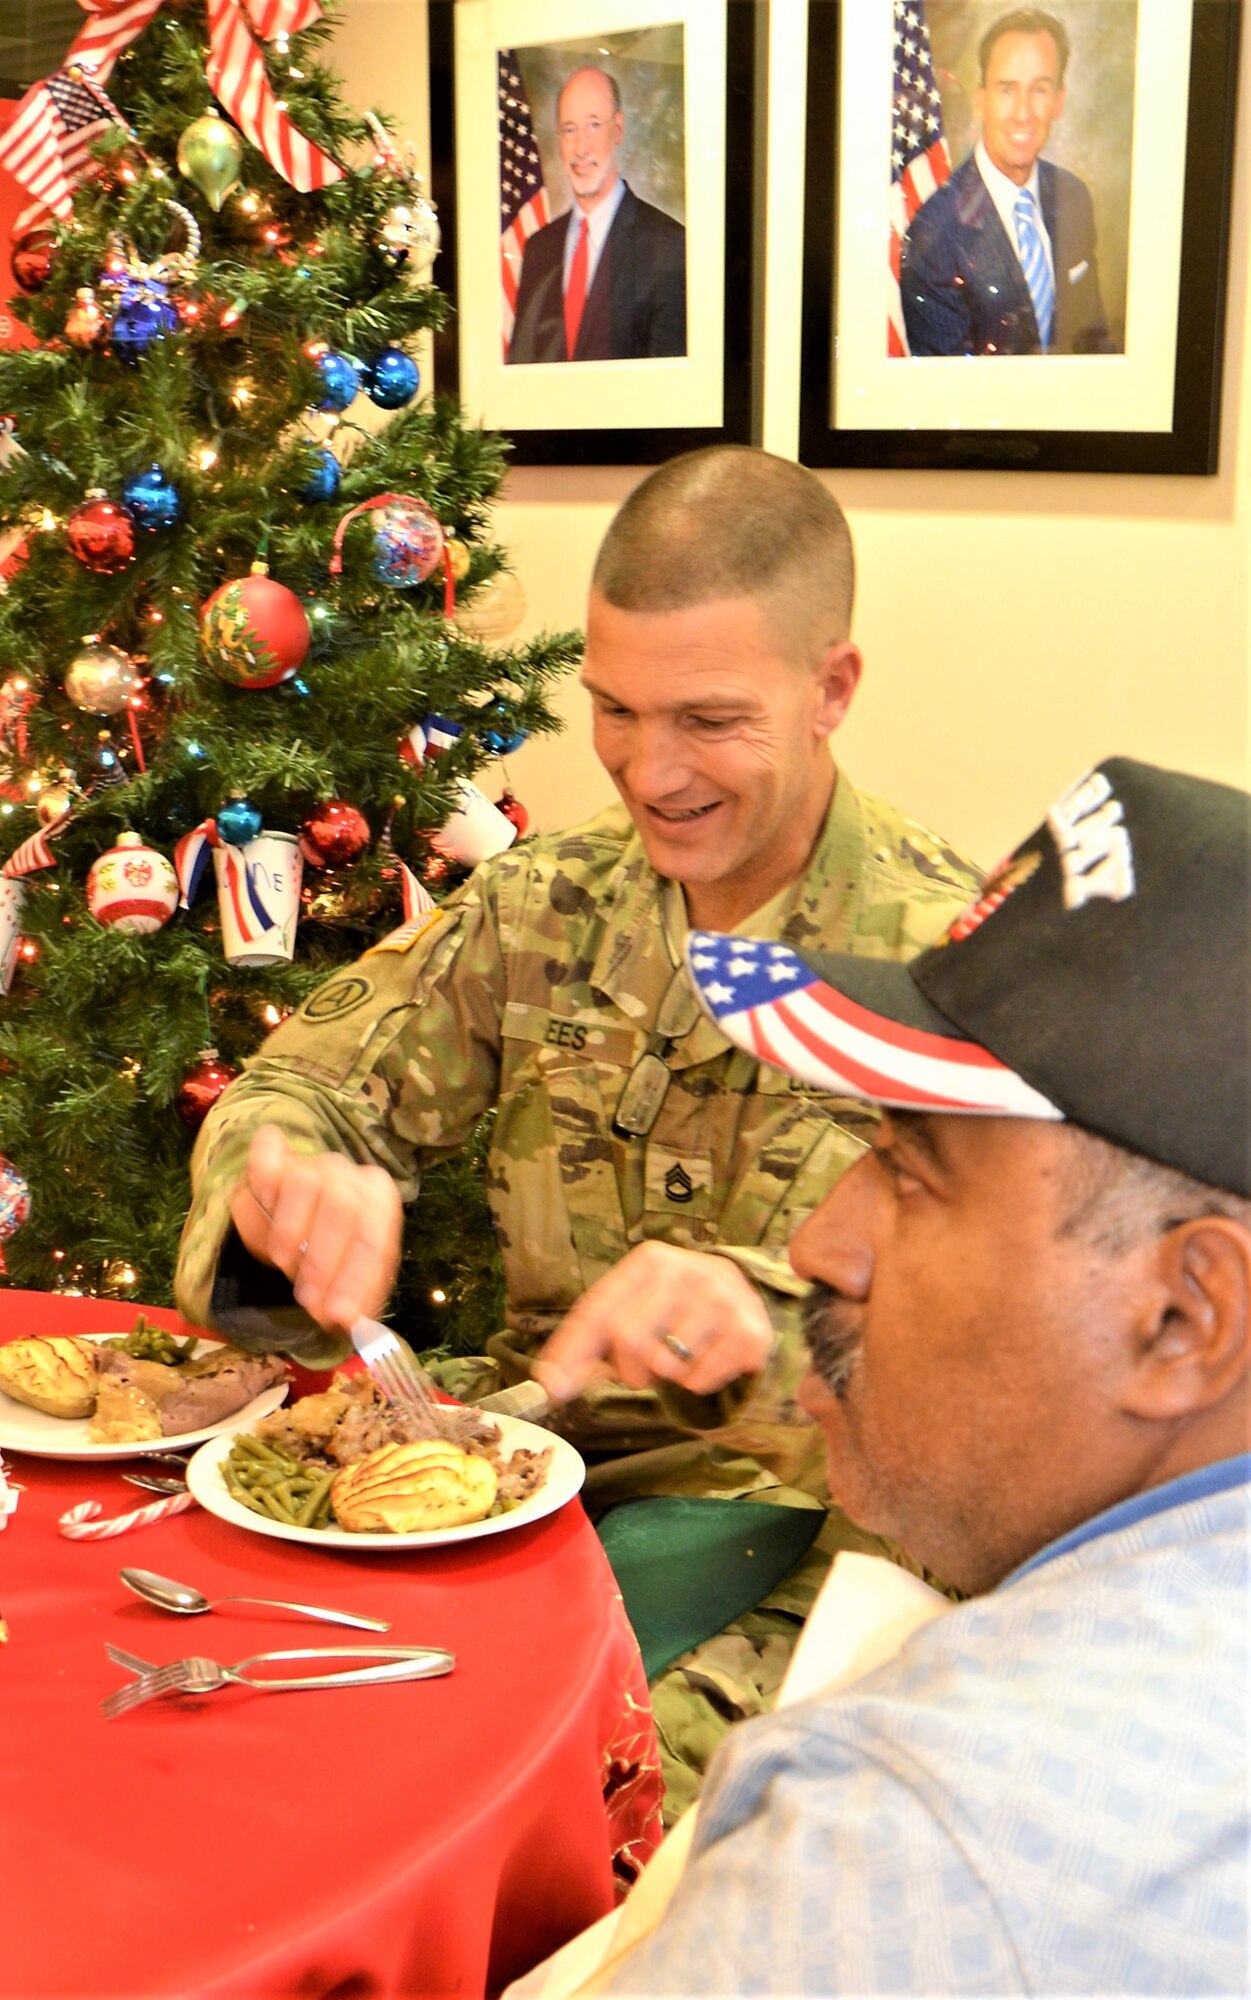 Sgt. 1st Class Timothy Sees, Delta Company, Pa. Army National Guard recruiter based out of the Southampton Armory, Philadelphia, serves a meal to a resident of the Delaware Valley Veteran’s Home, Philadelphia, Dec. 14, 2017. Pa. Air and Army Guardsmen visited residents and their families for a holiday-themed event. (U.S. Air National Guard photo by Tech. Sgt. Andria Allmond)